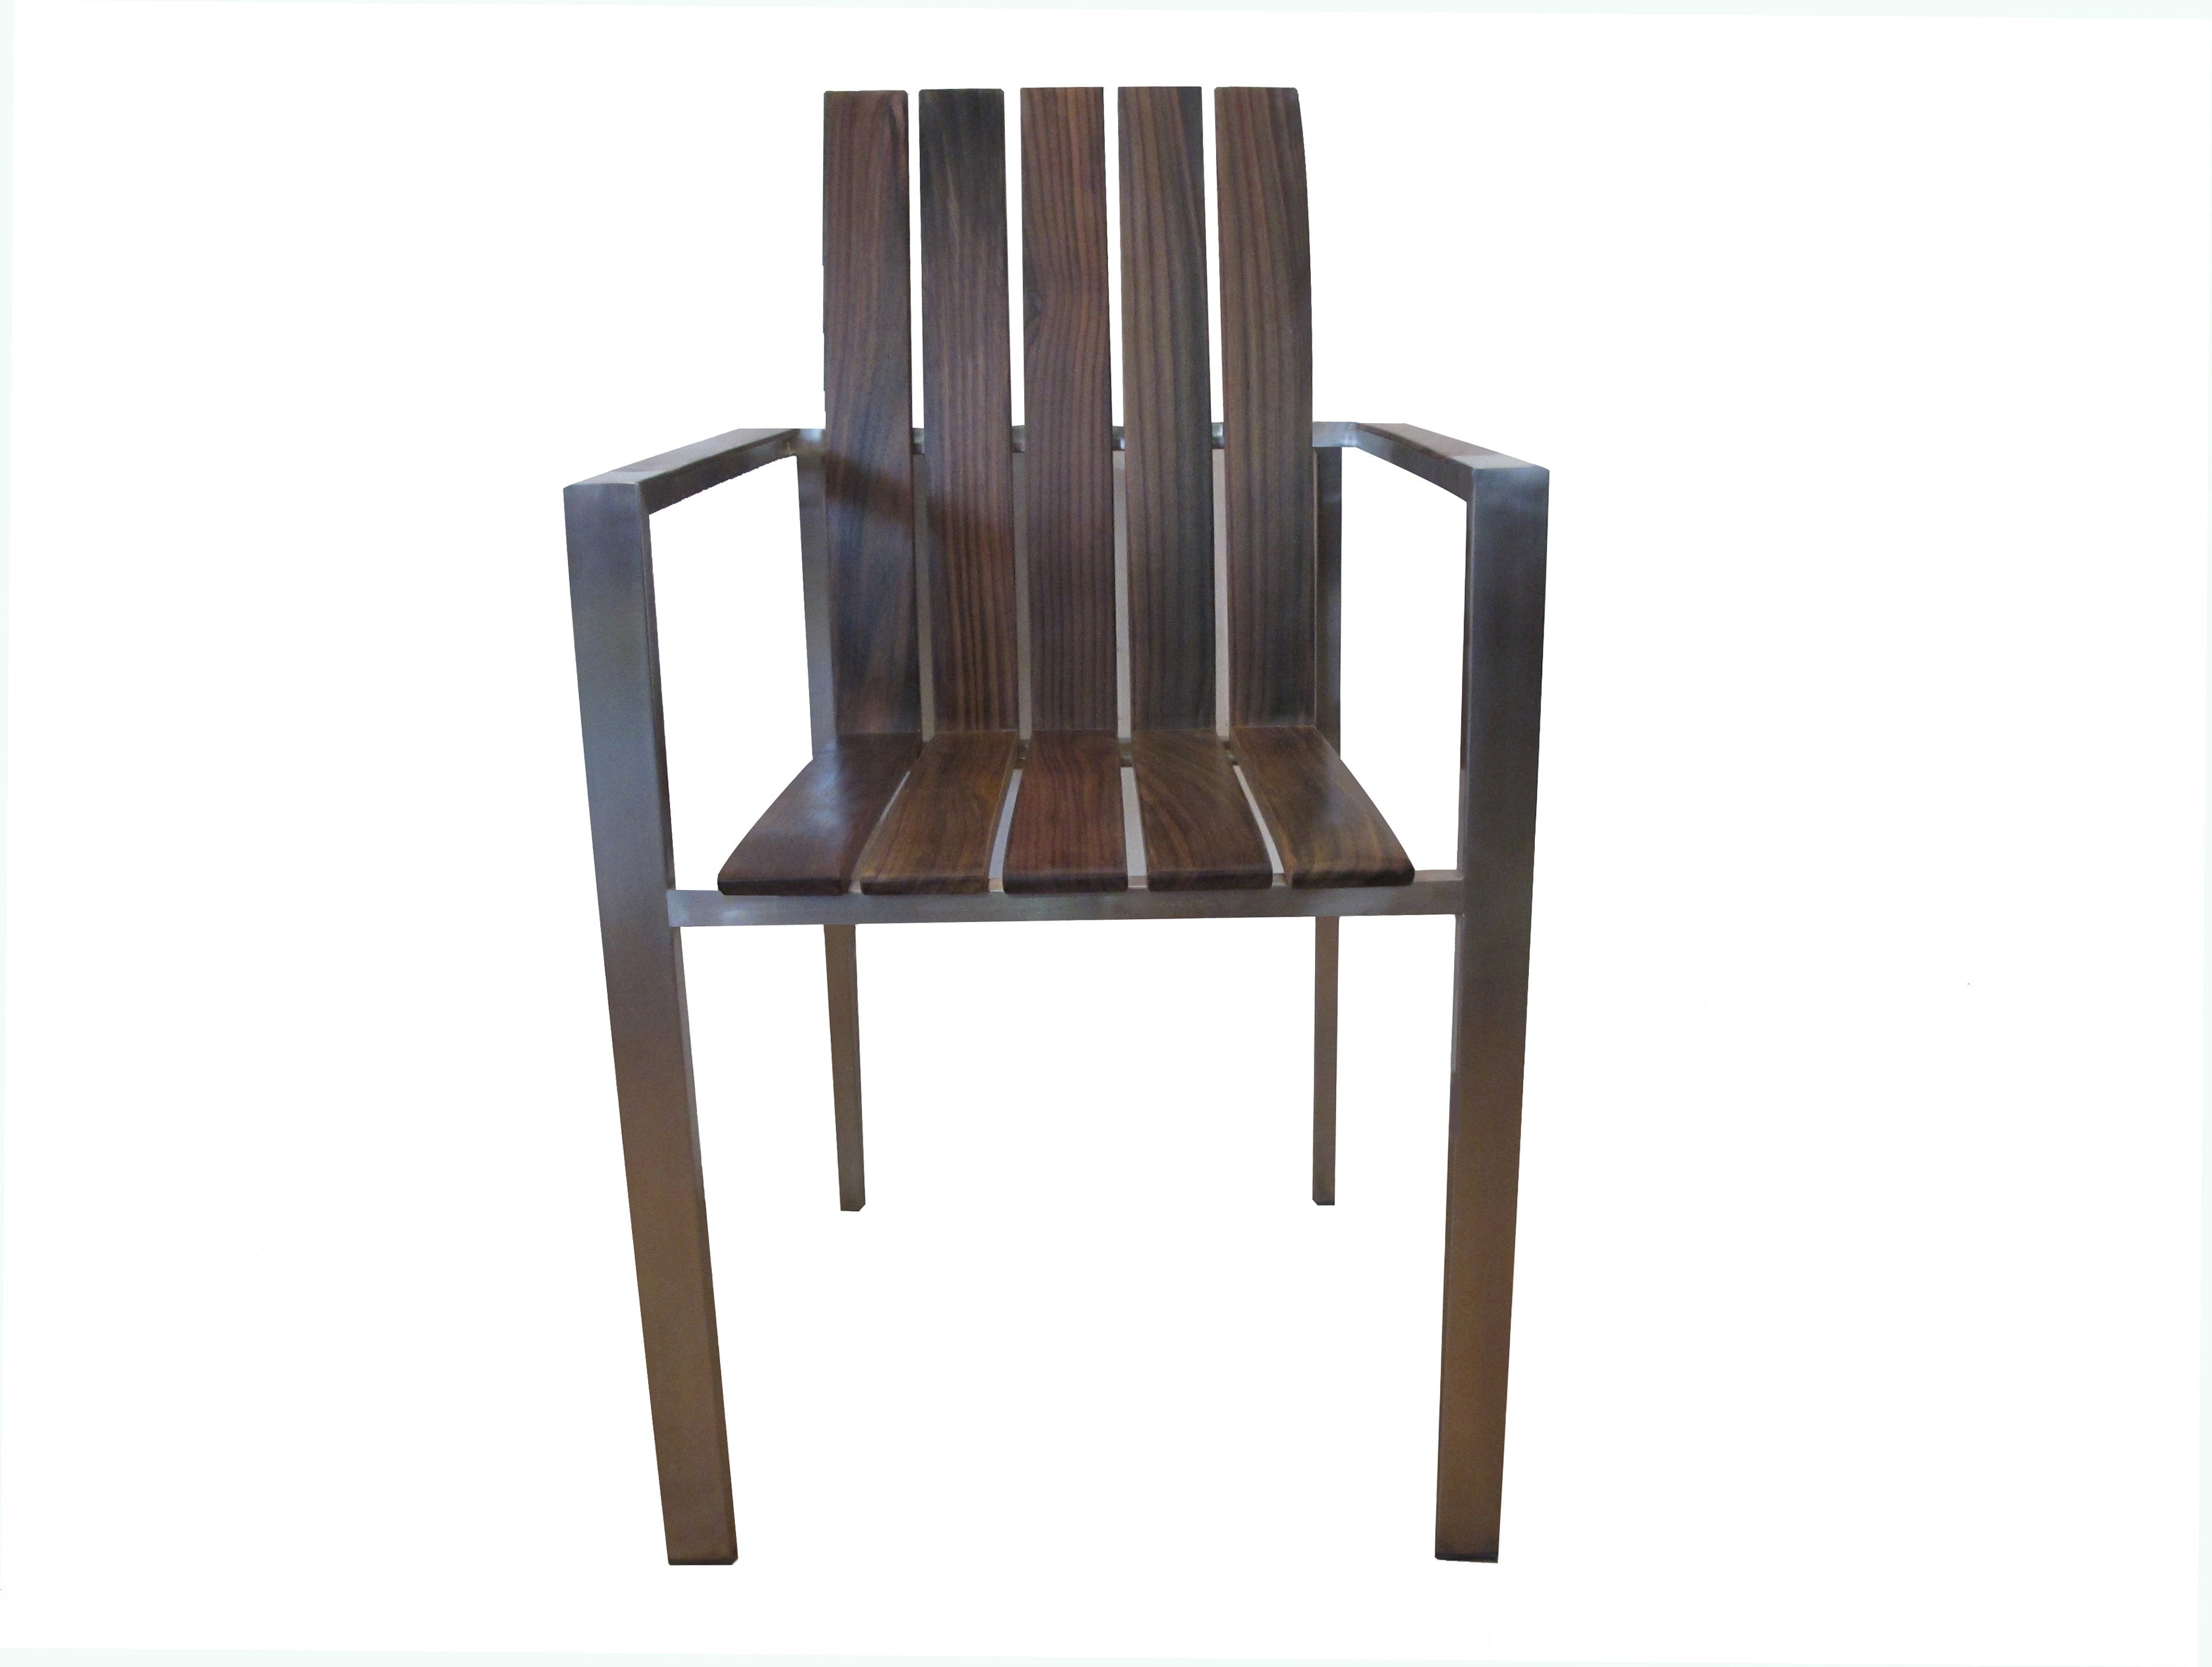 Solid rosewood in 304 stainless legs, Titanium chairs can be used outdoors and outdoors.